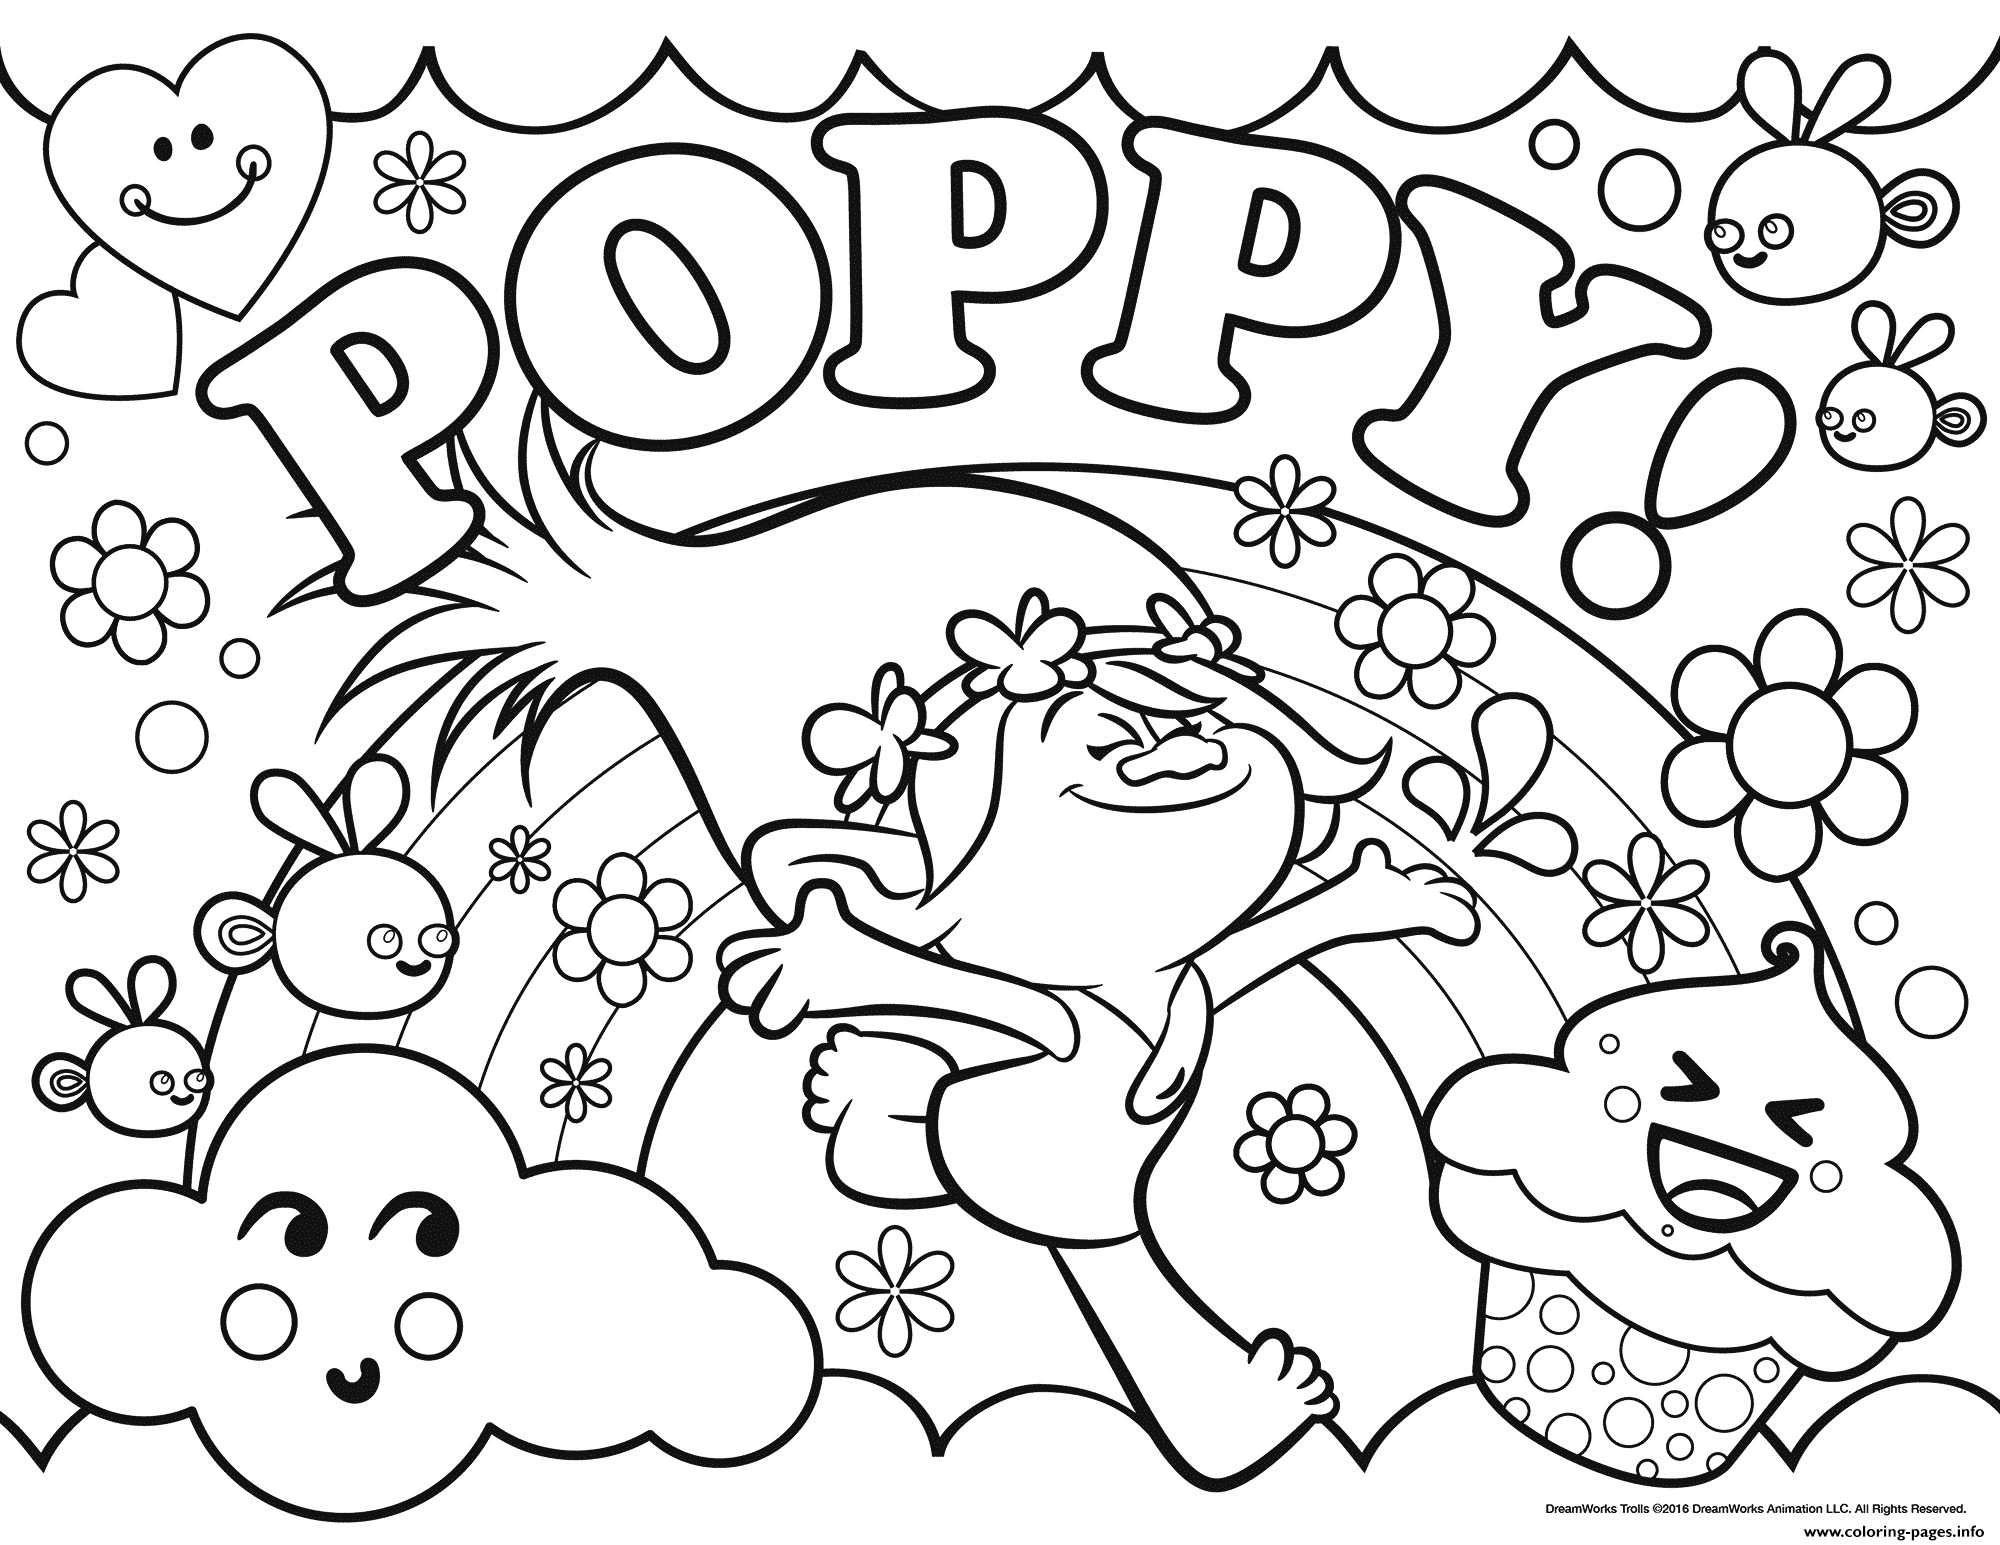 Childrens Coloring Pages Trolls Wallpaper